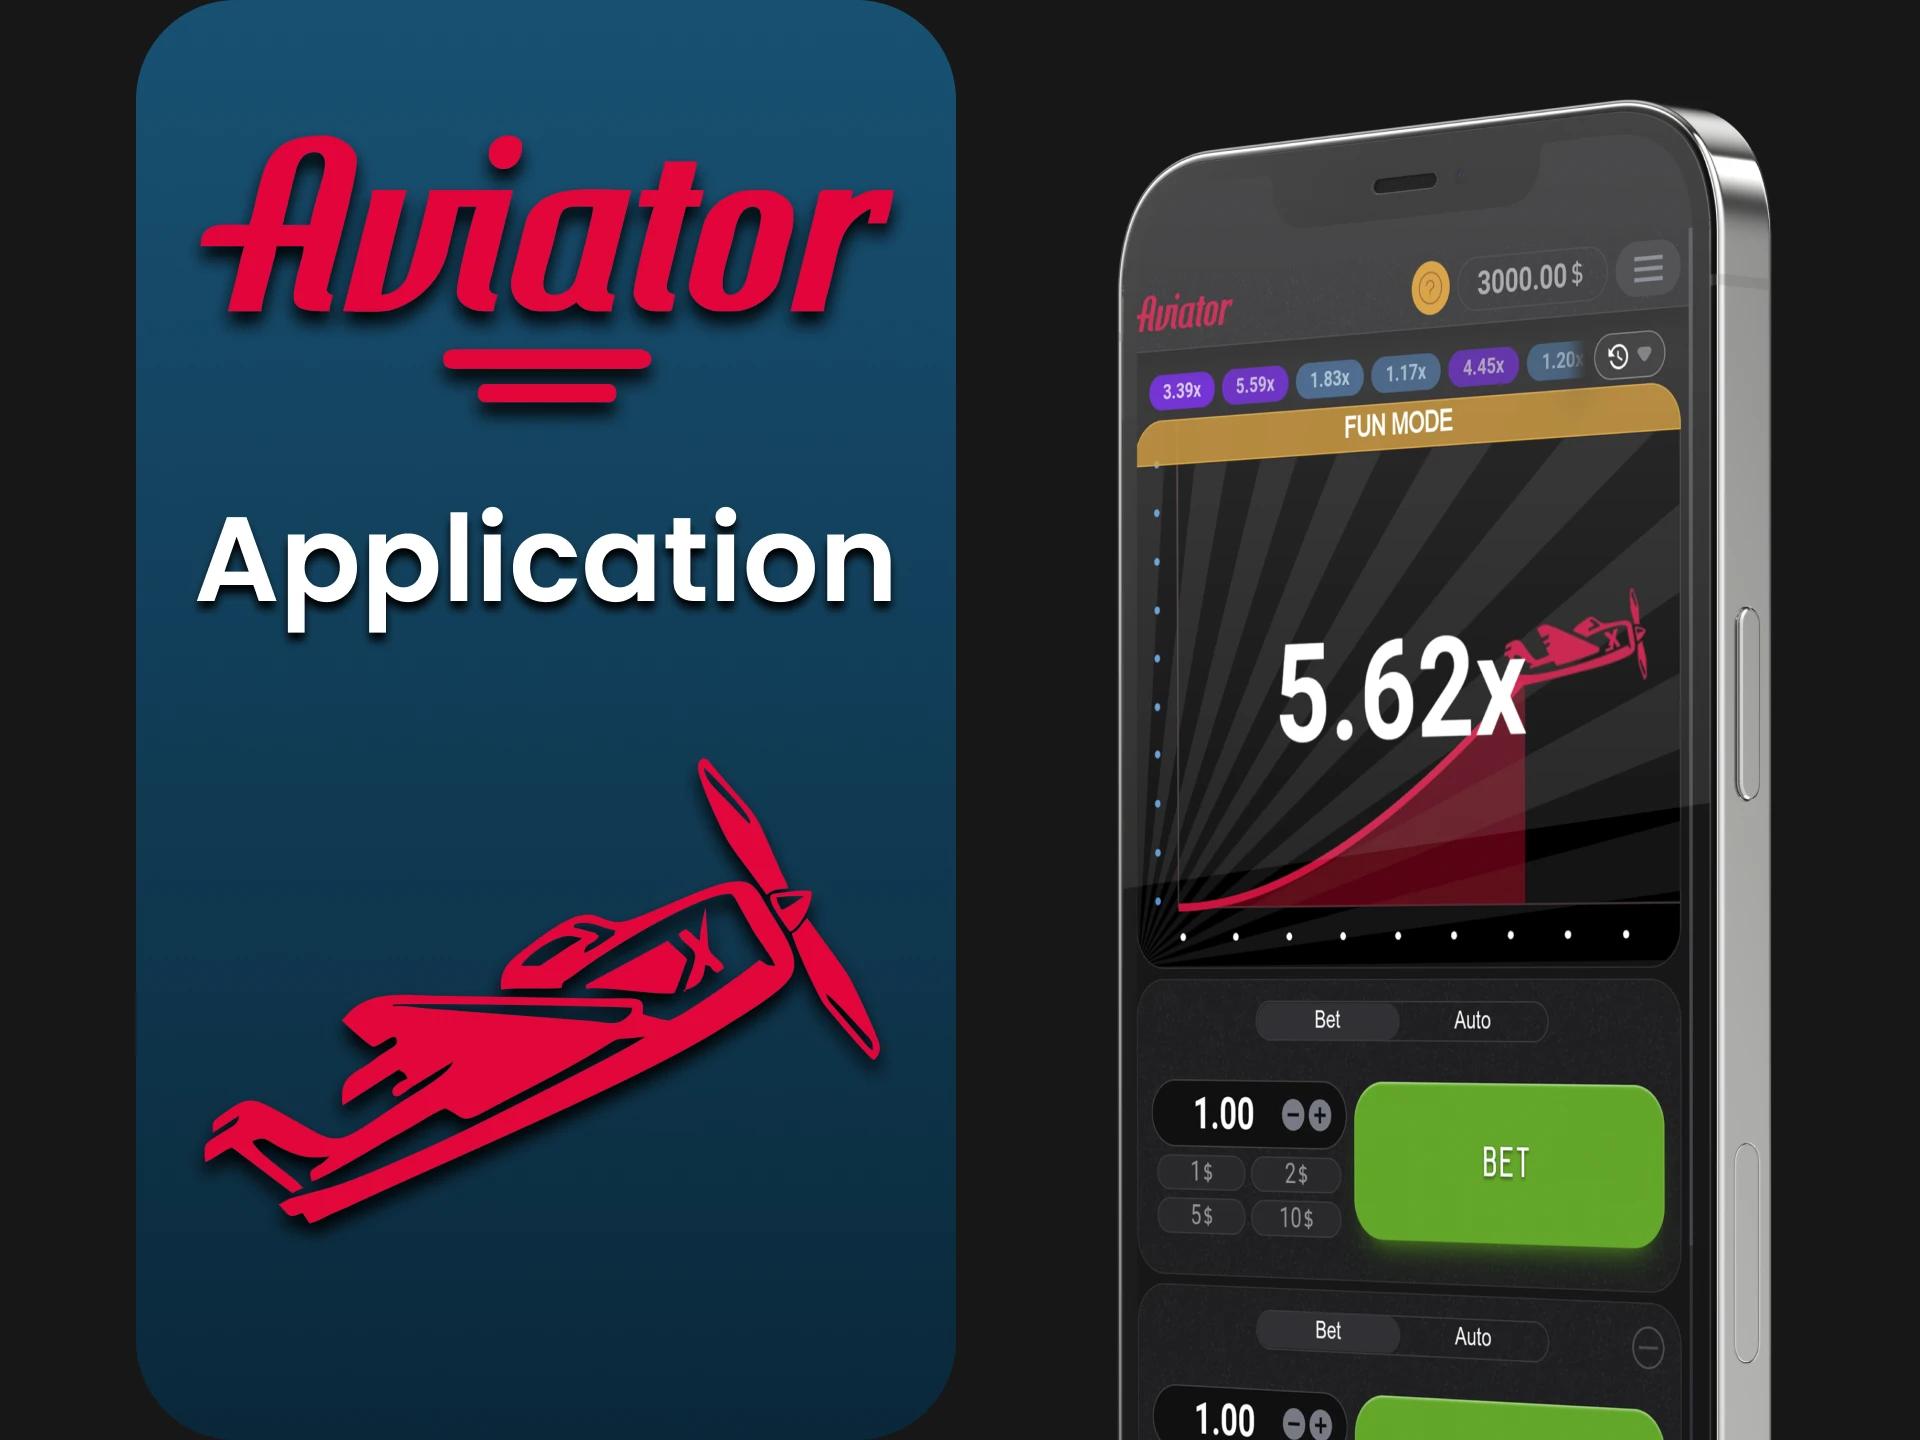 You can play Aviator through the application on your phone.